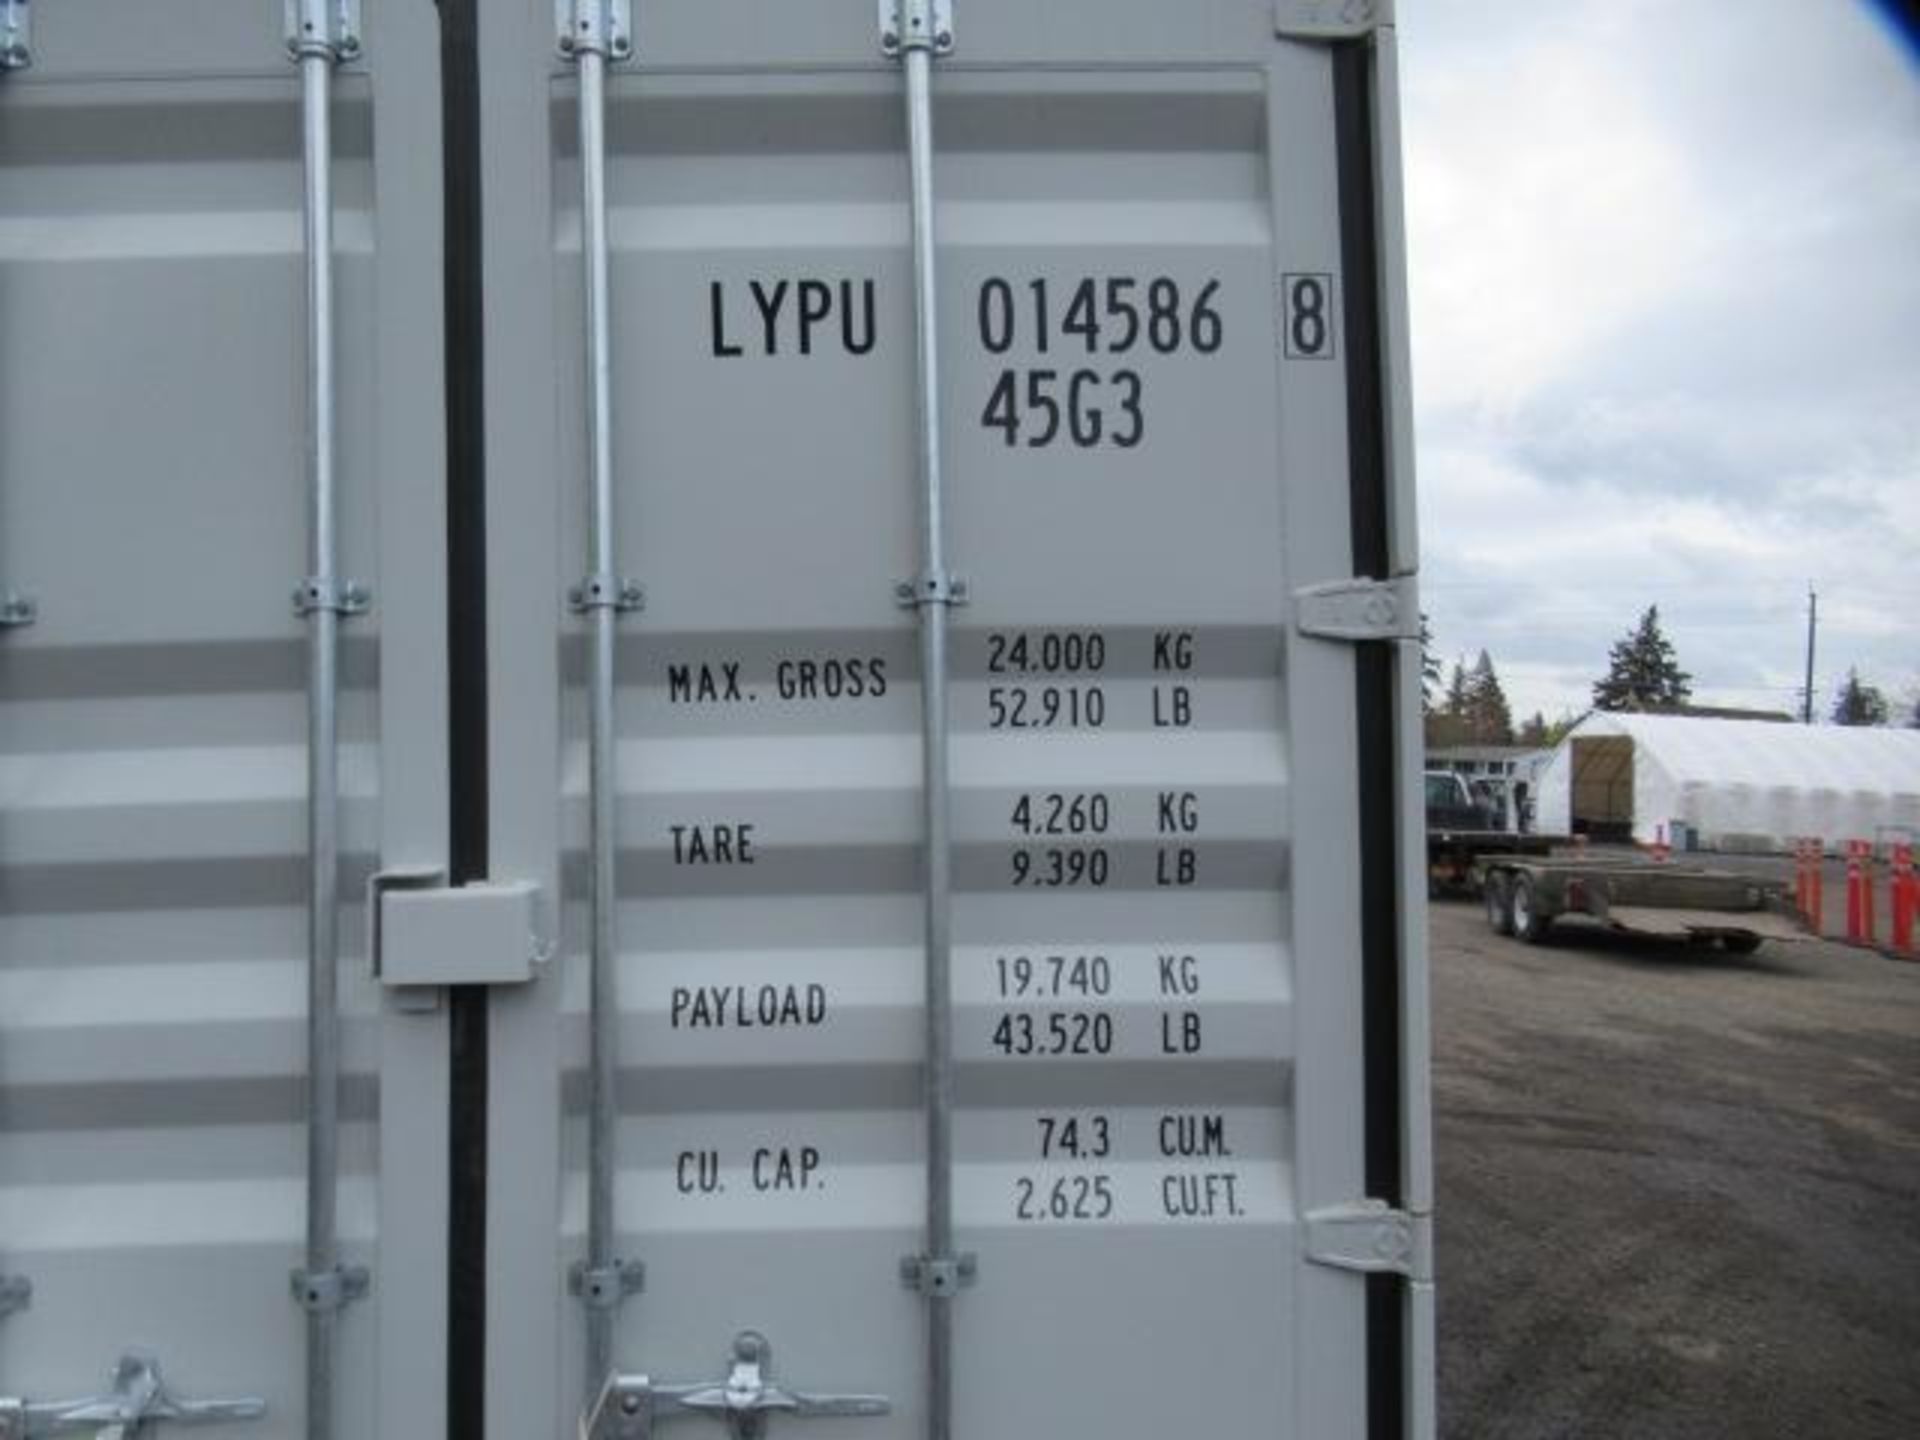 2024 40' HIGH CUBE SHIPPING CONTAINER W/ (4) SIDE DOORS, SER#: LYPU0145868 (UNUSED) - Image 6 of 6